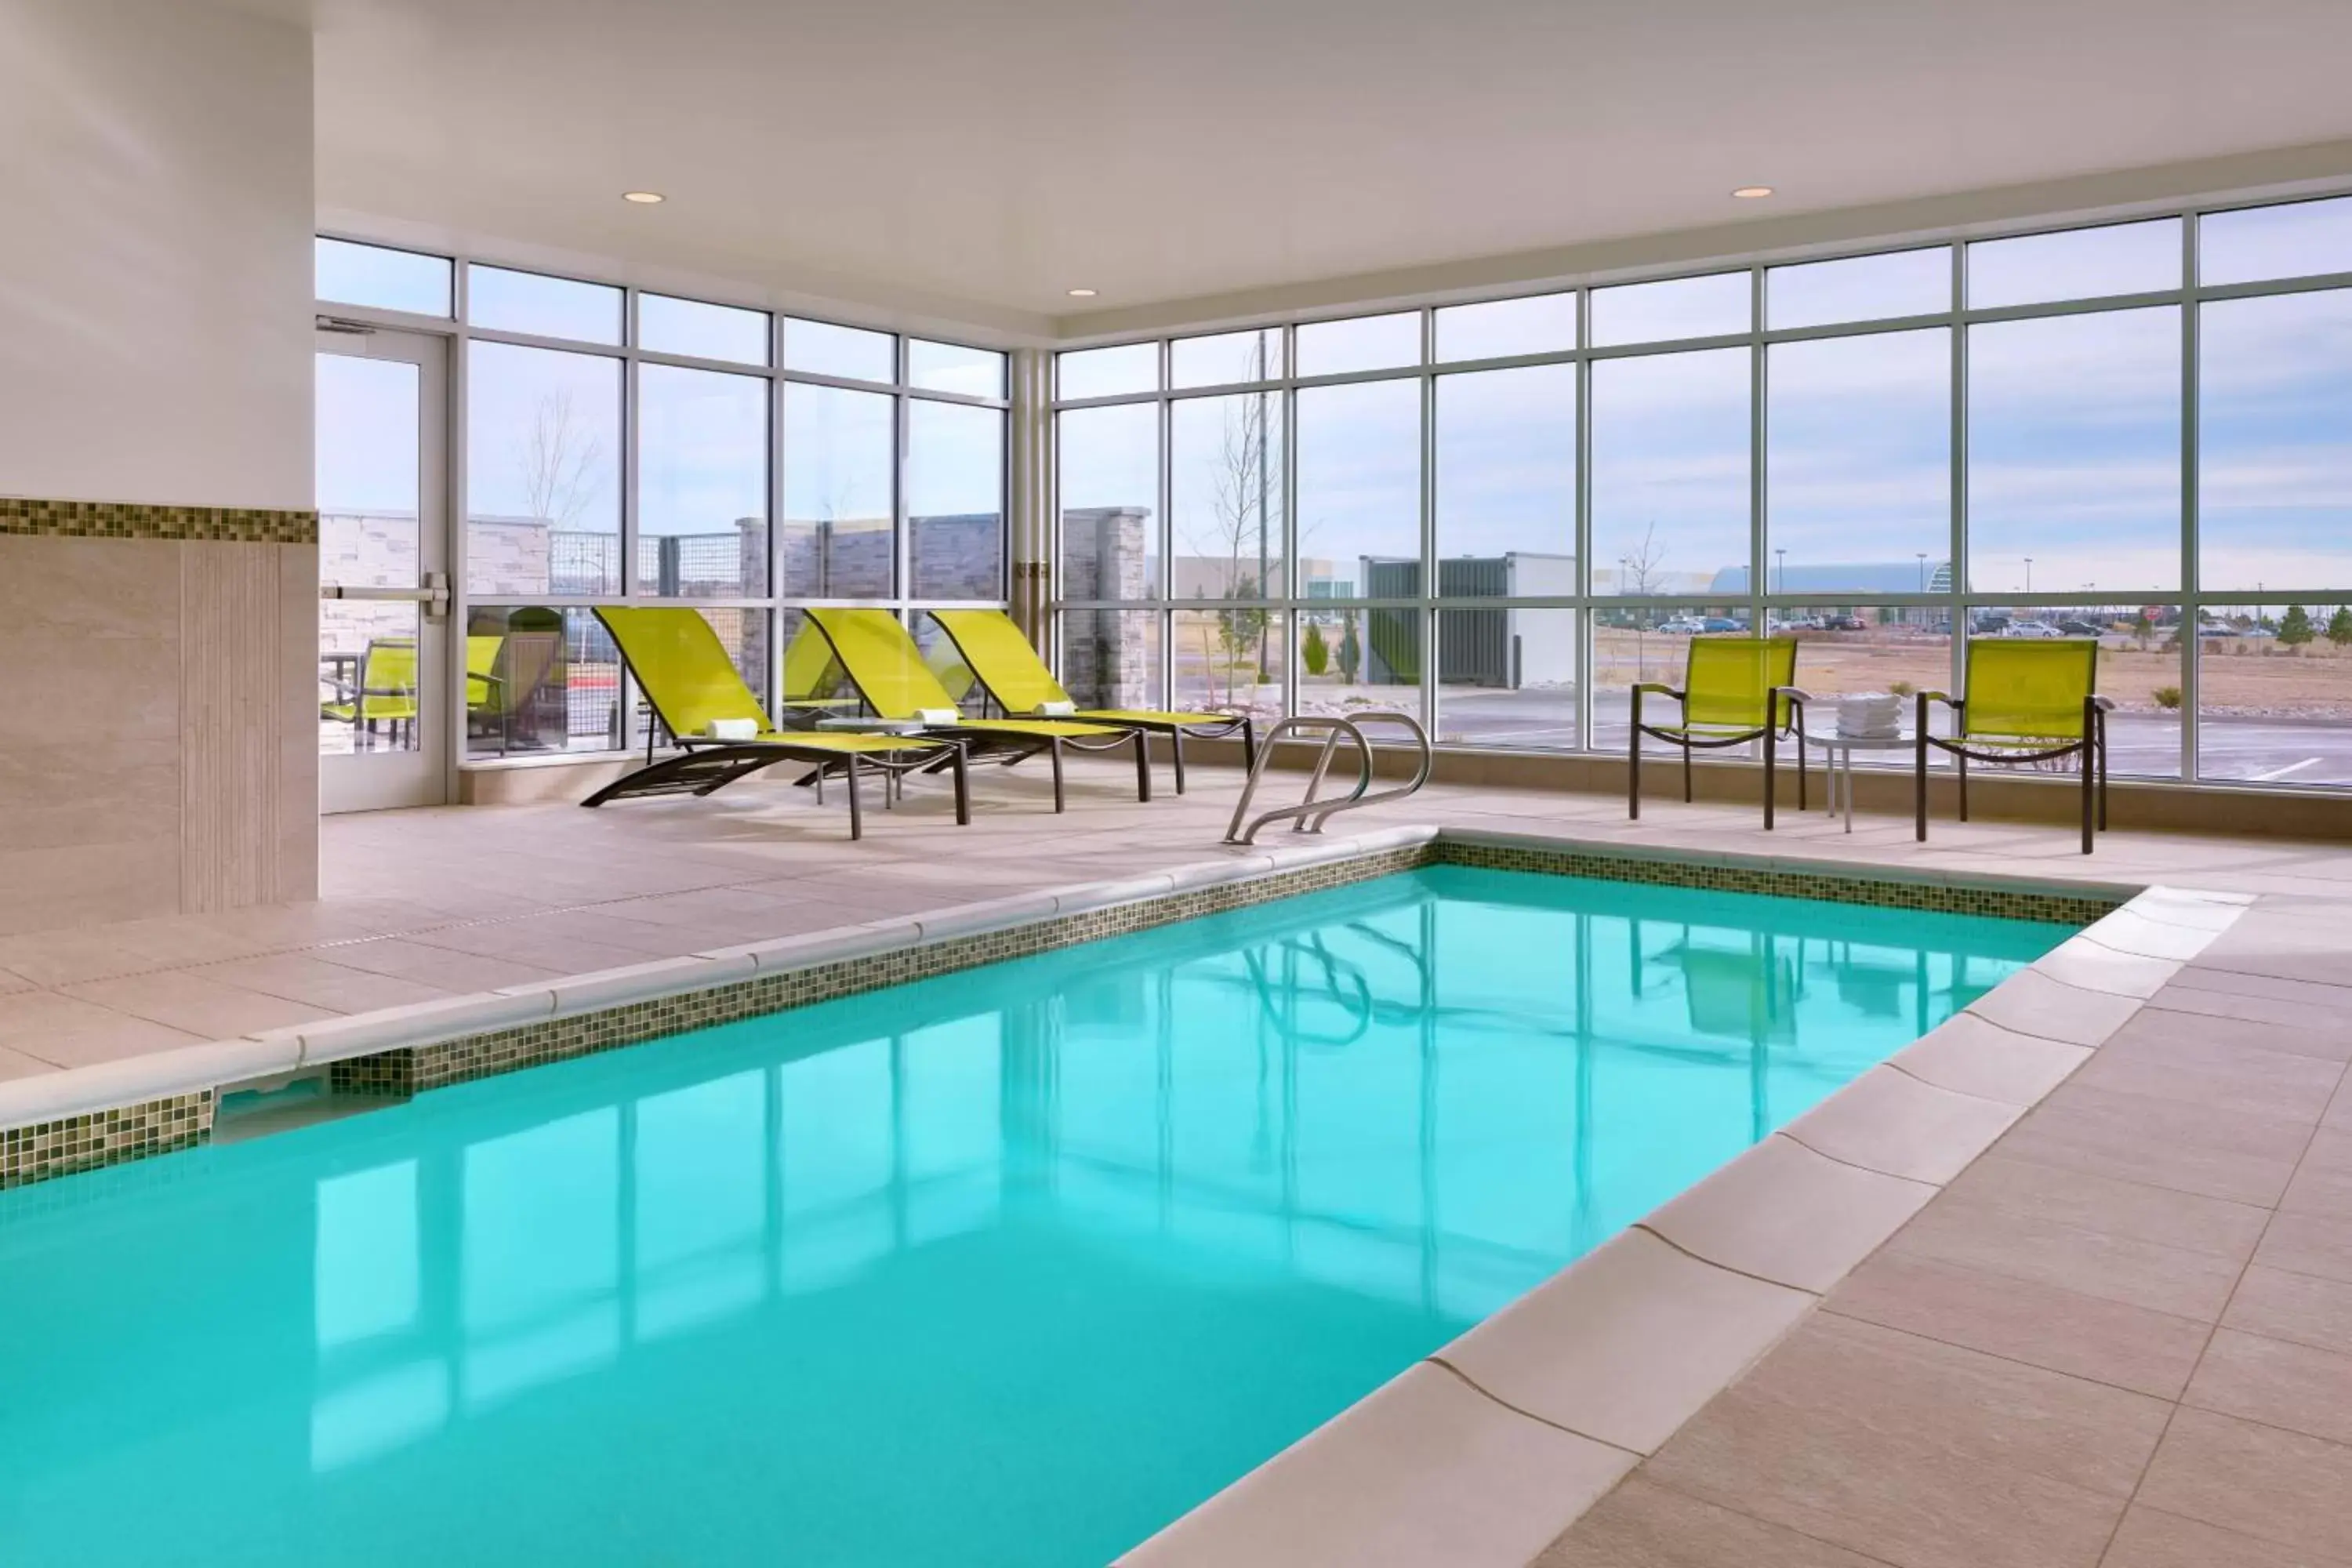 Swimming Pool in Springhill Suites by Marriott Colorado Springs North/Air Force Academy